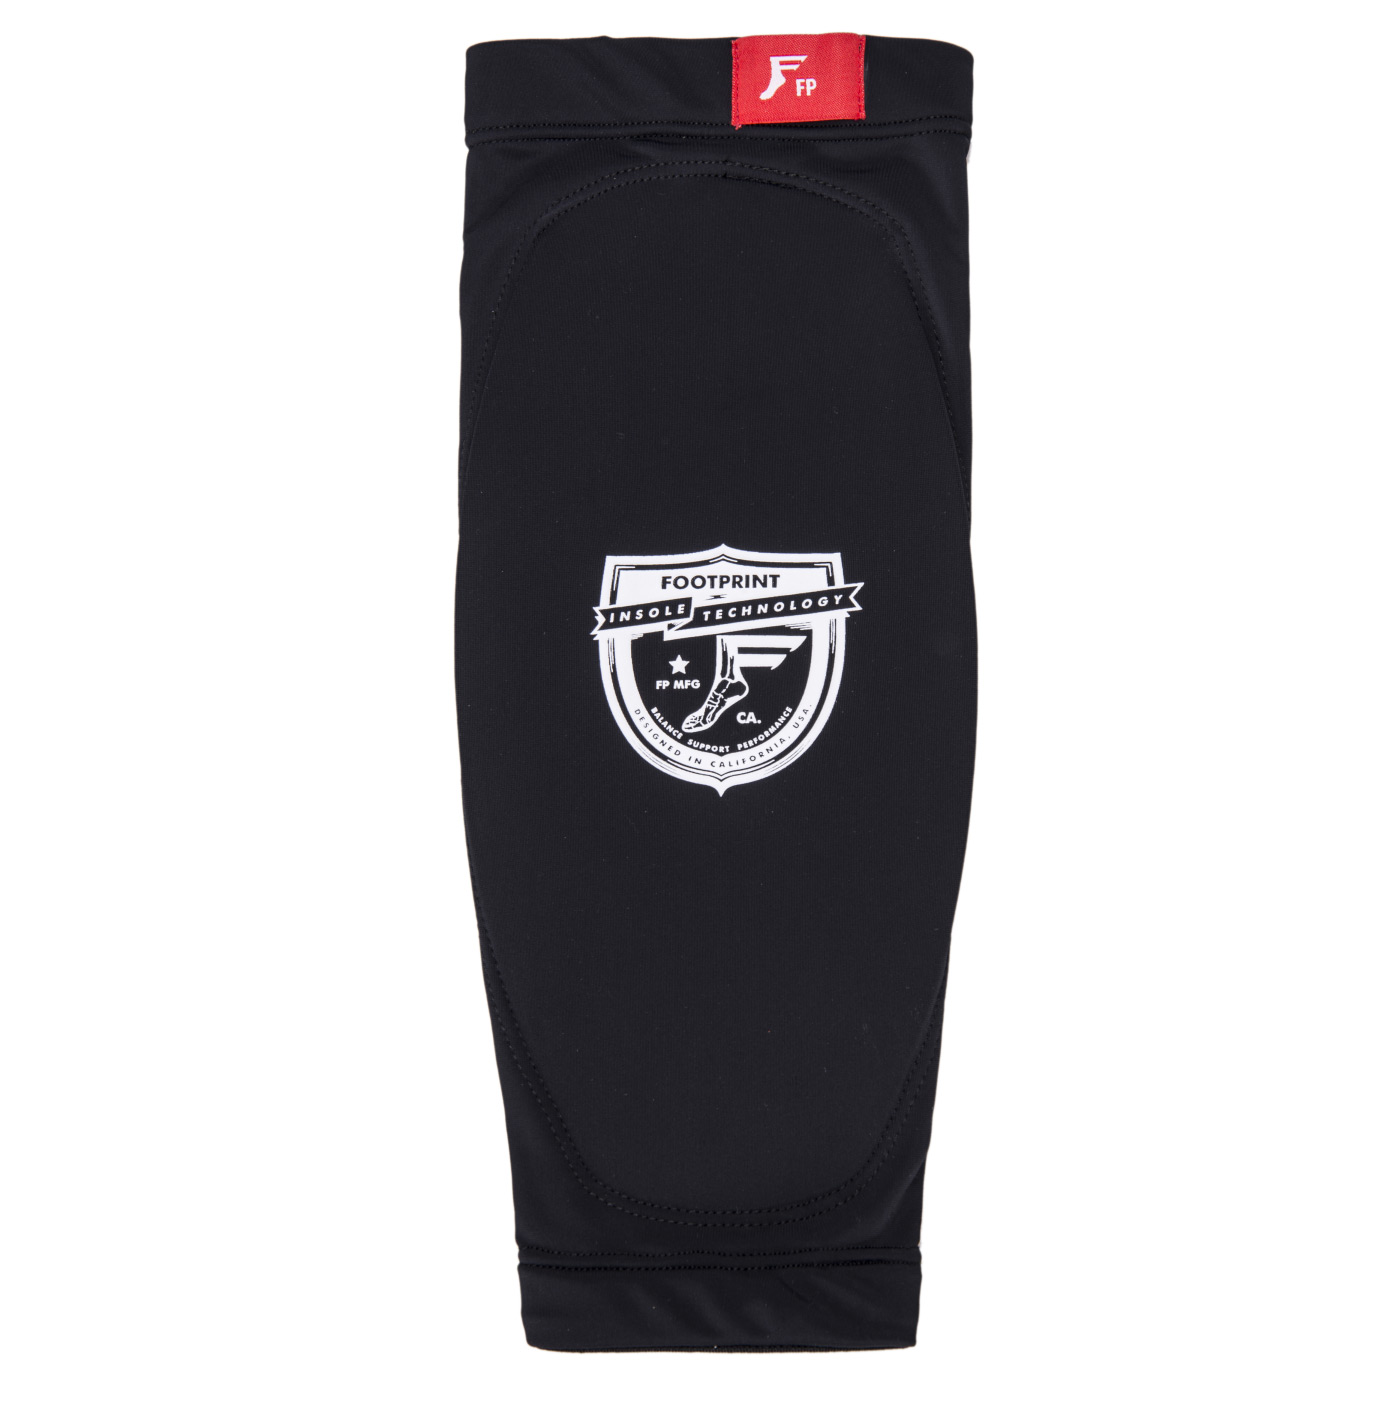 Footprint Painkillers Protective Lo Pro Shin Sleeves